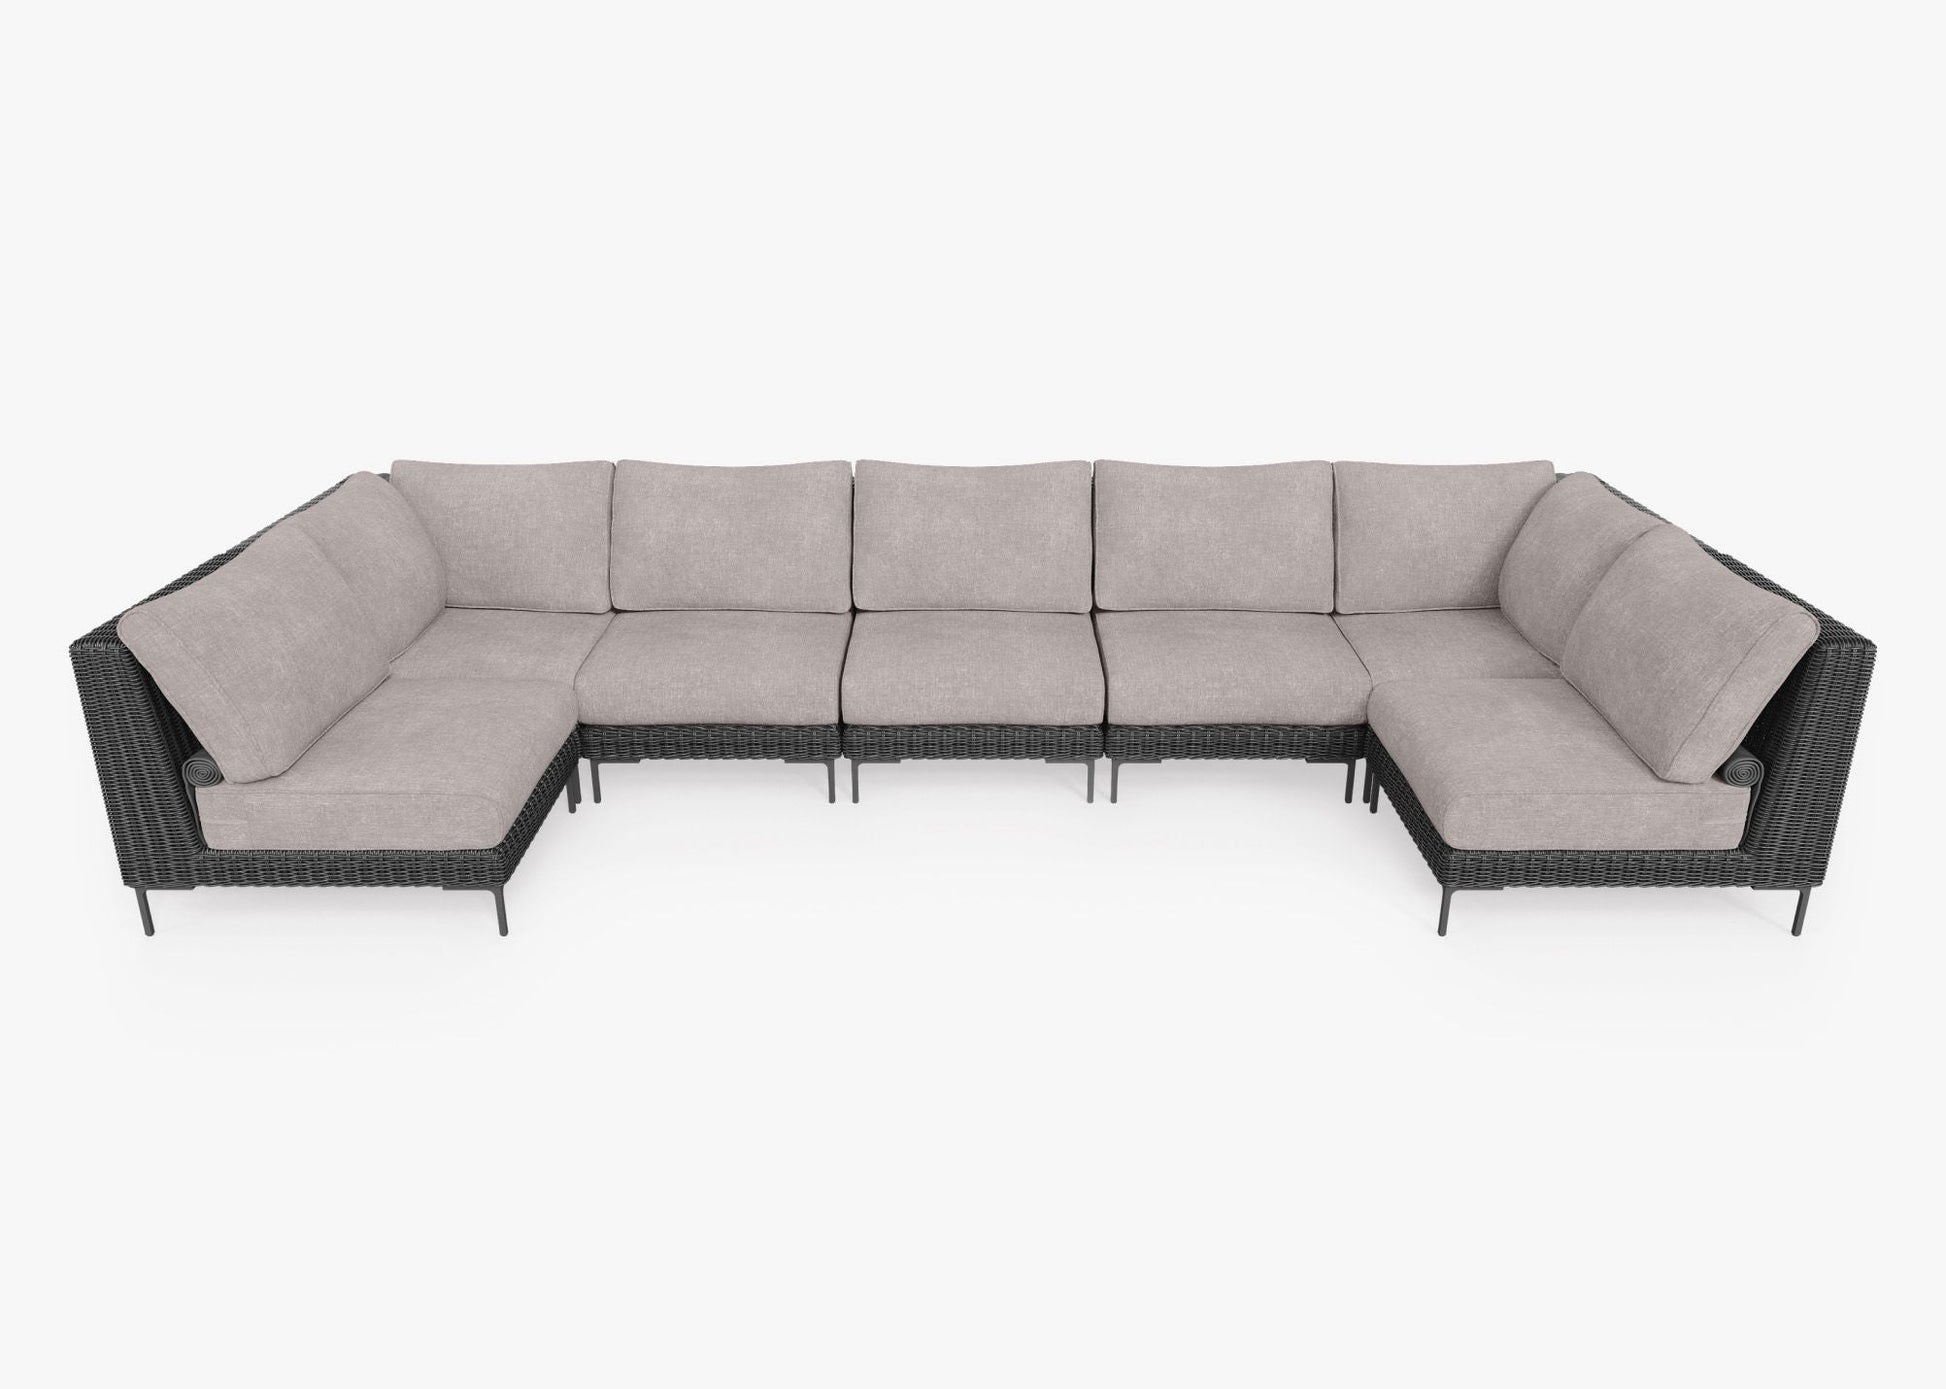 Live Outer 161" x 66" Black Wicker Outdoor U Sectional 7-Seat With Sandstone Gray Cushion